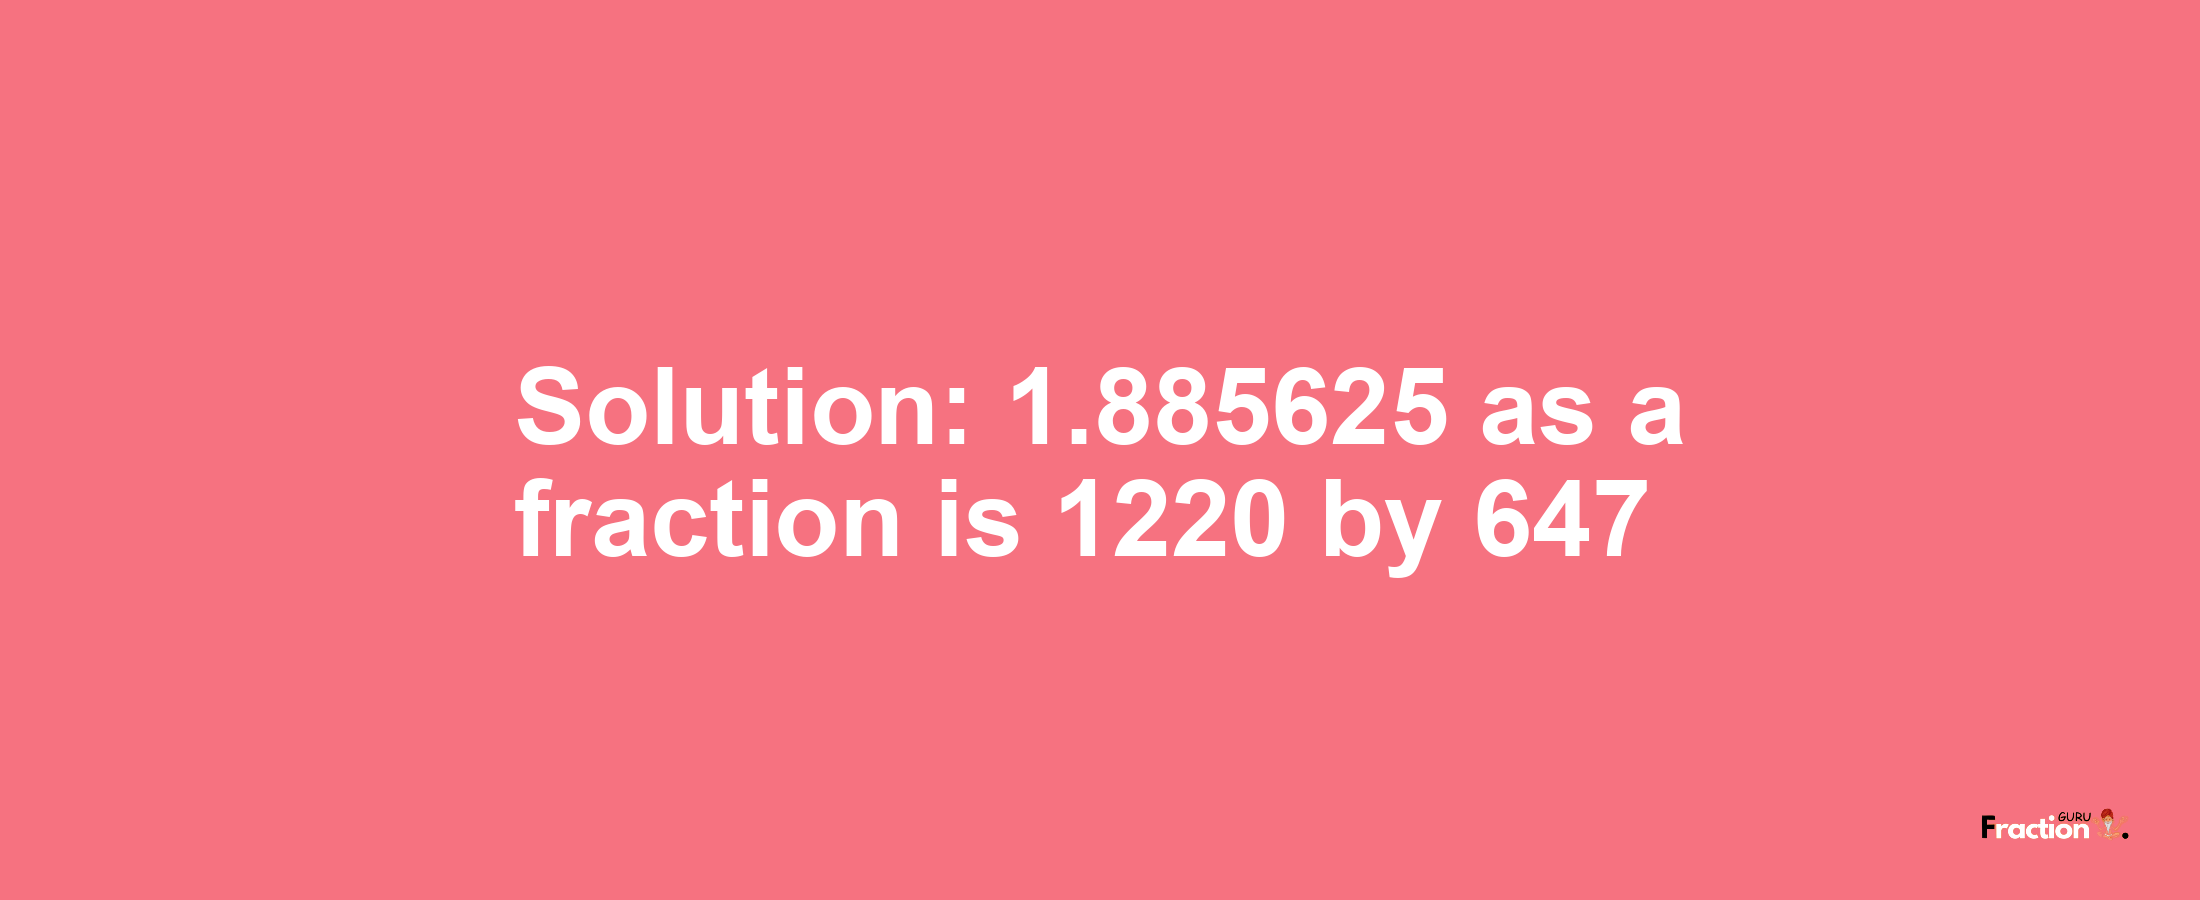 Solution:1.885625 as a fraction is 1220/647